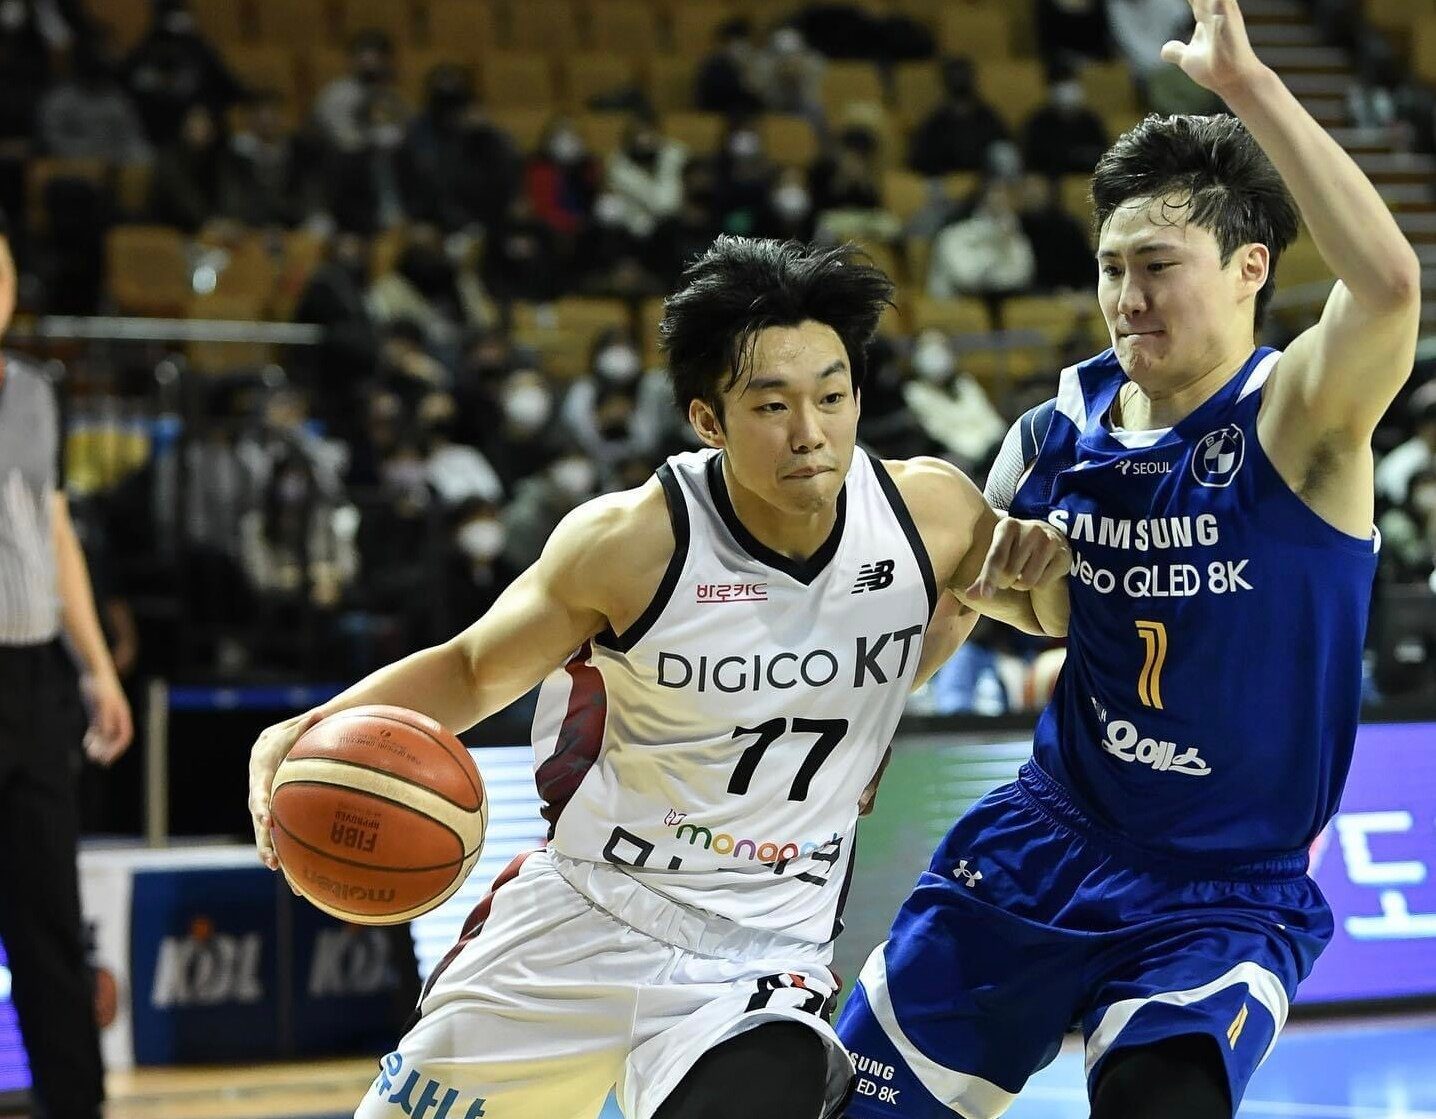 Dave Ildefonso makes long-awaited KBL debut as Suwon downs Seoul